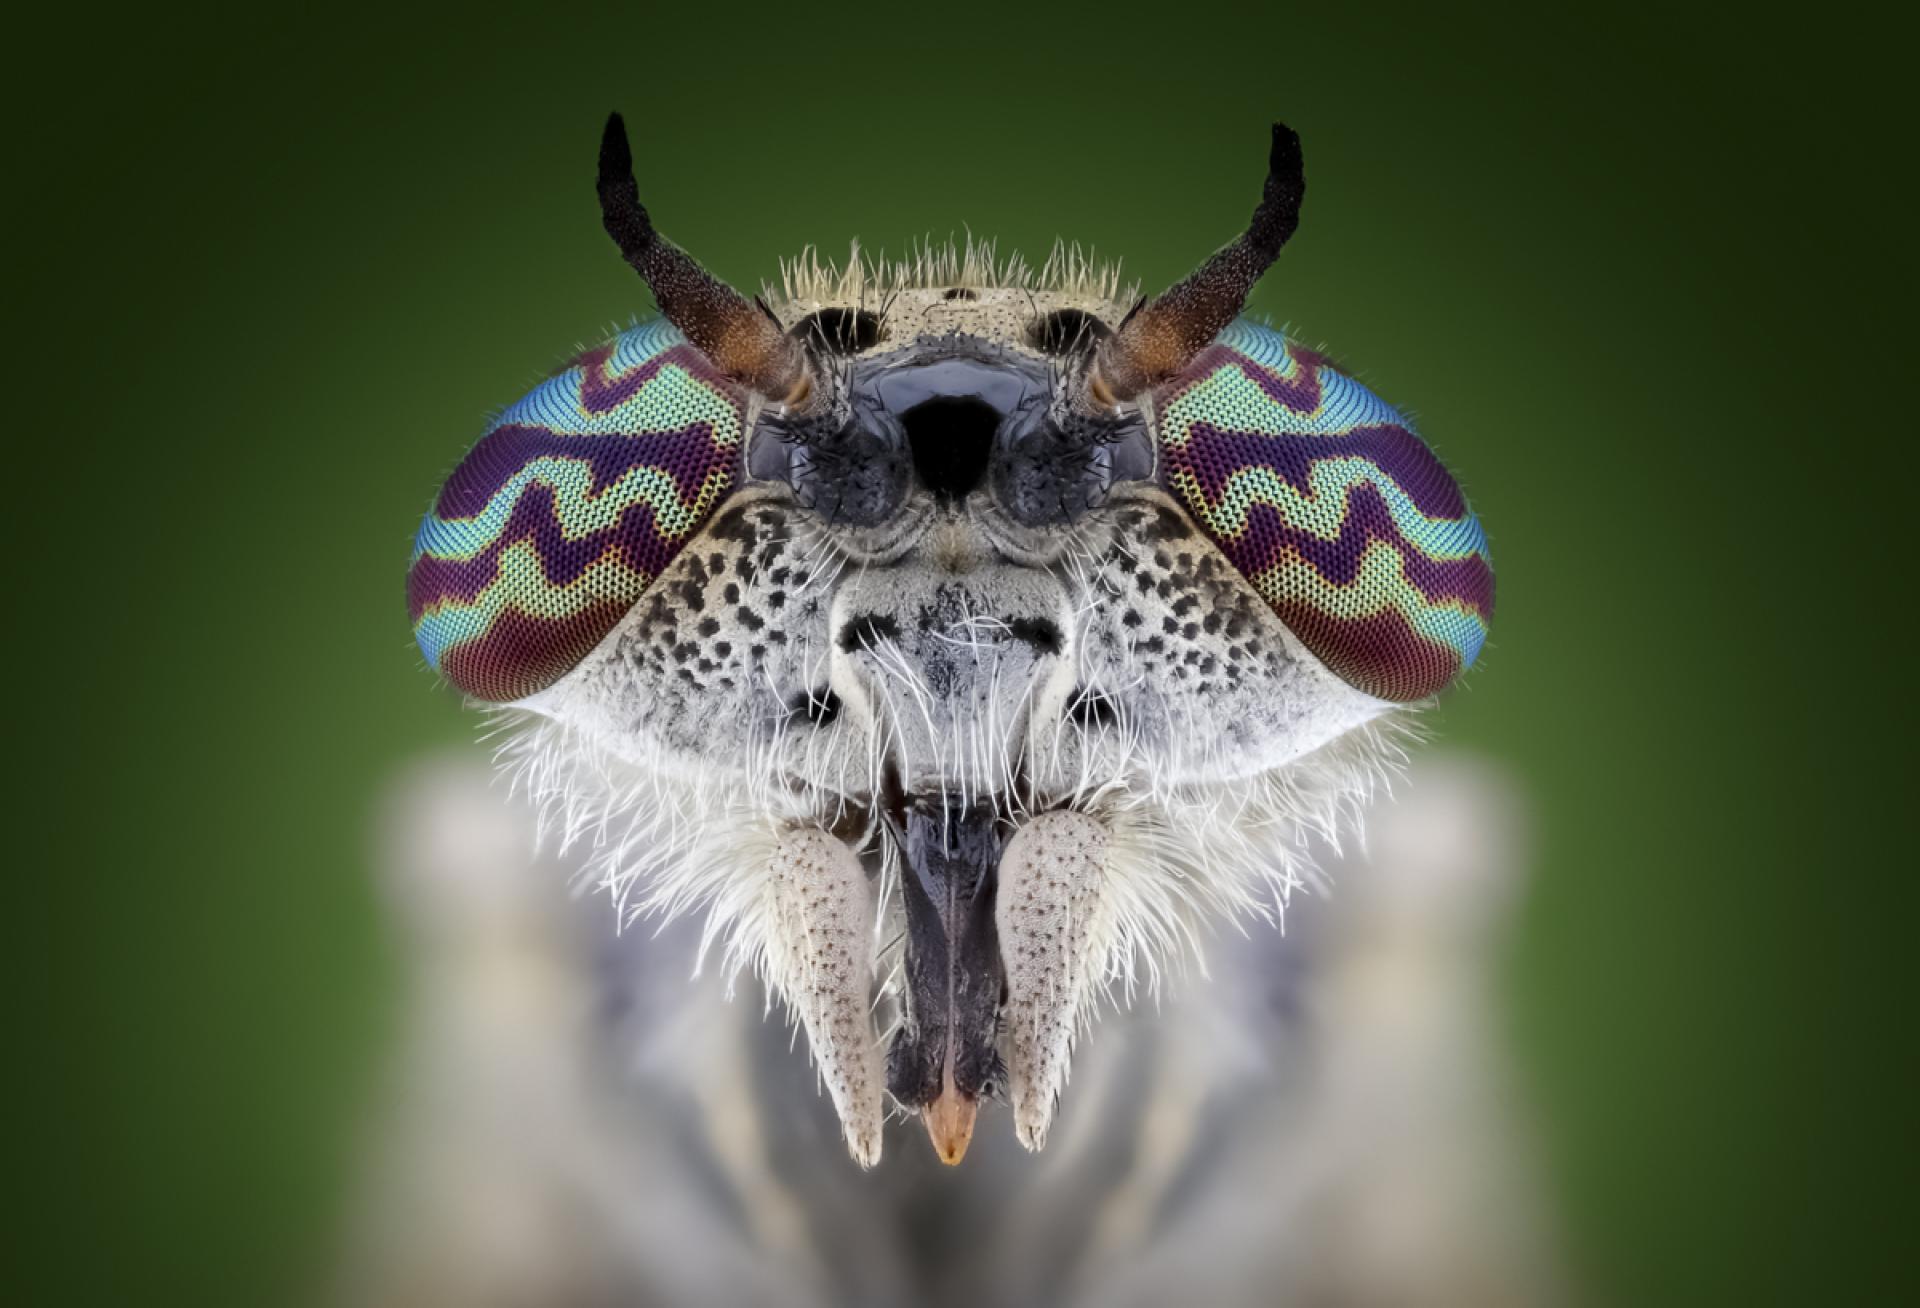 London Photography Awards Winner - The Beauty of Insects